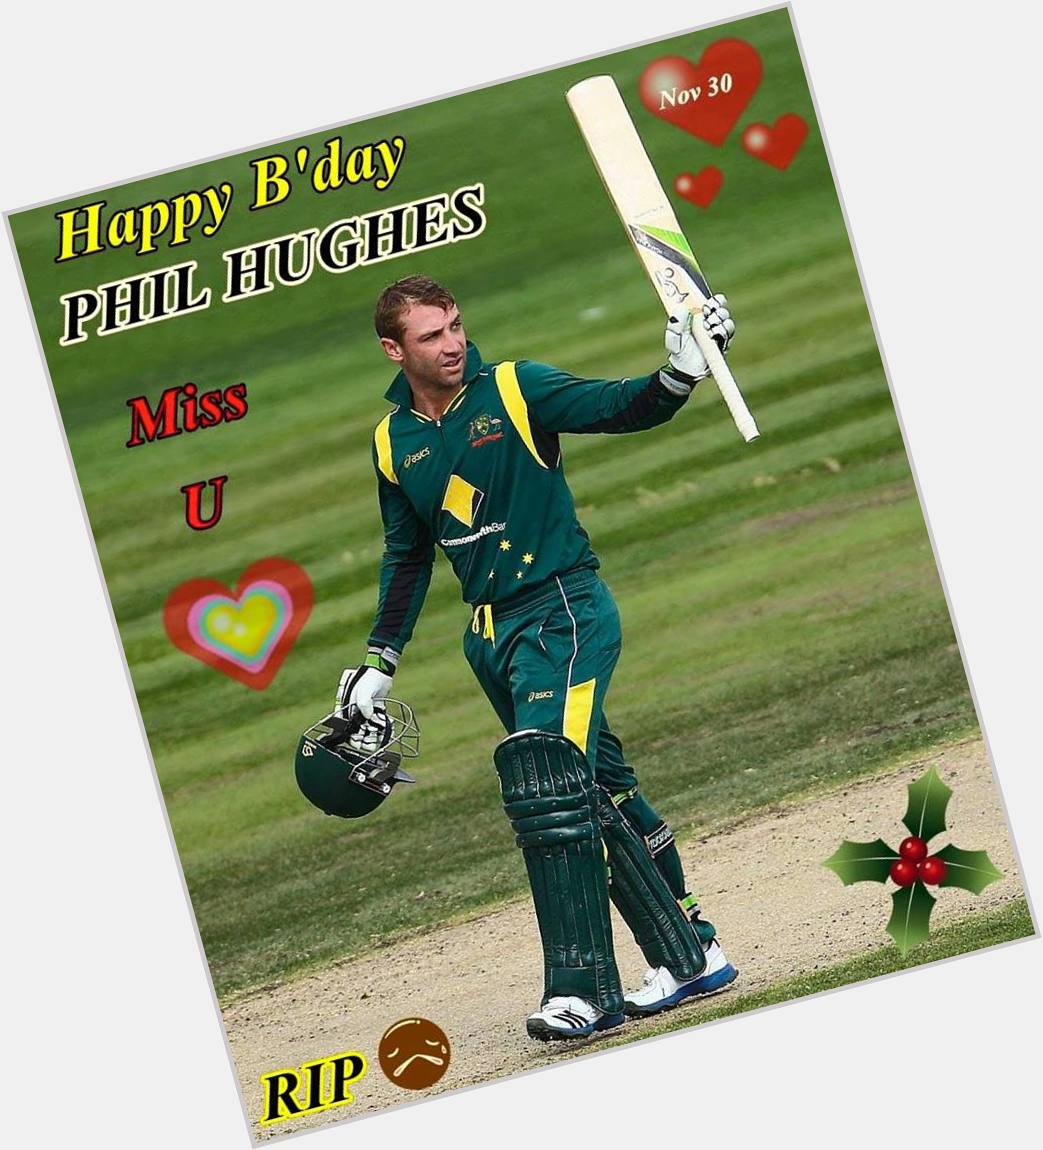 Happy Birthday to Champ Phillip Hughes !
You will Always Stay in Our Hearts . Cricket will Miss You 